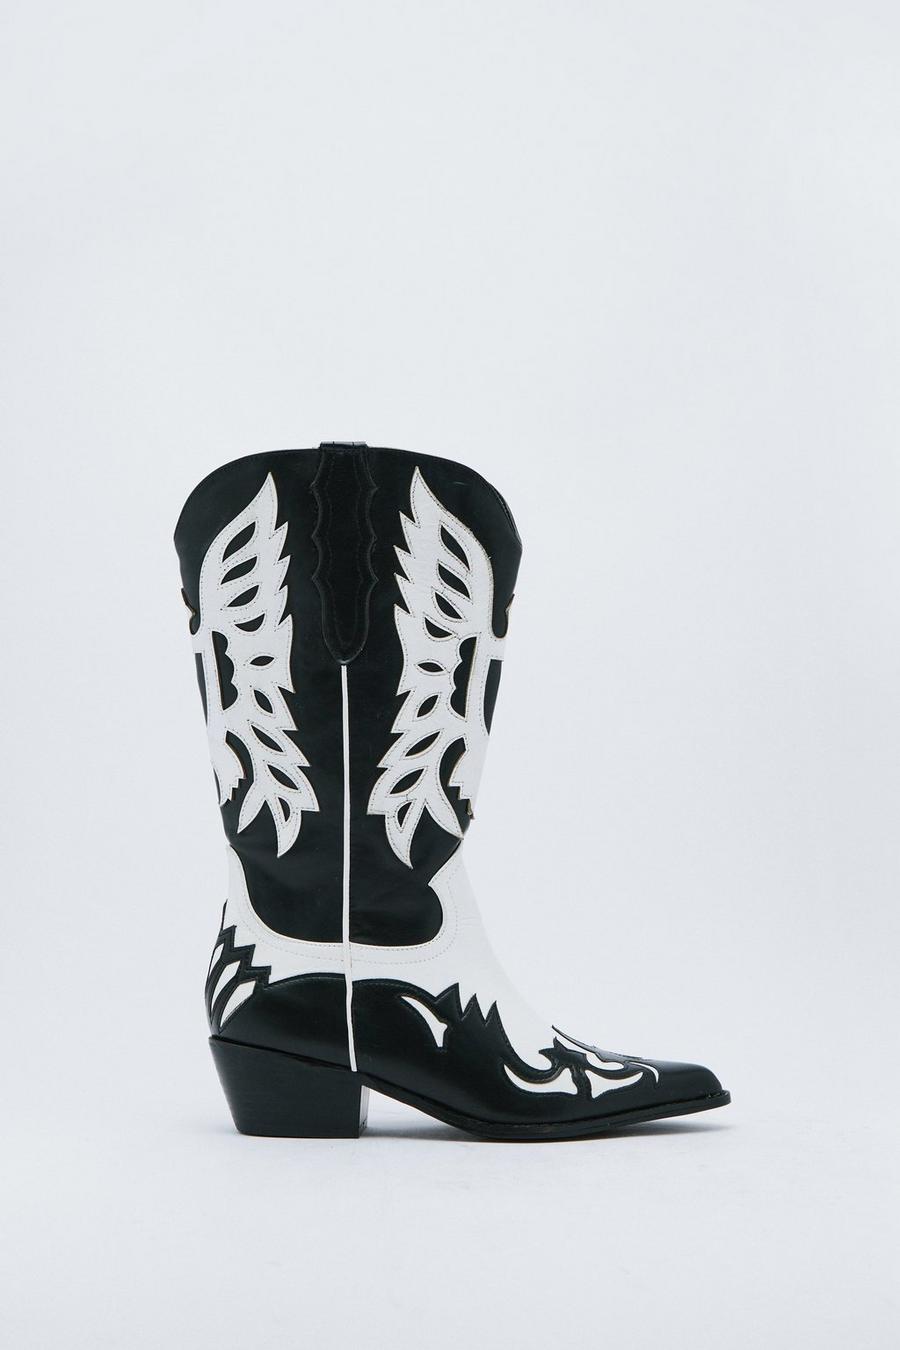 cowboy boot black and white